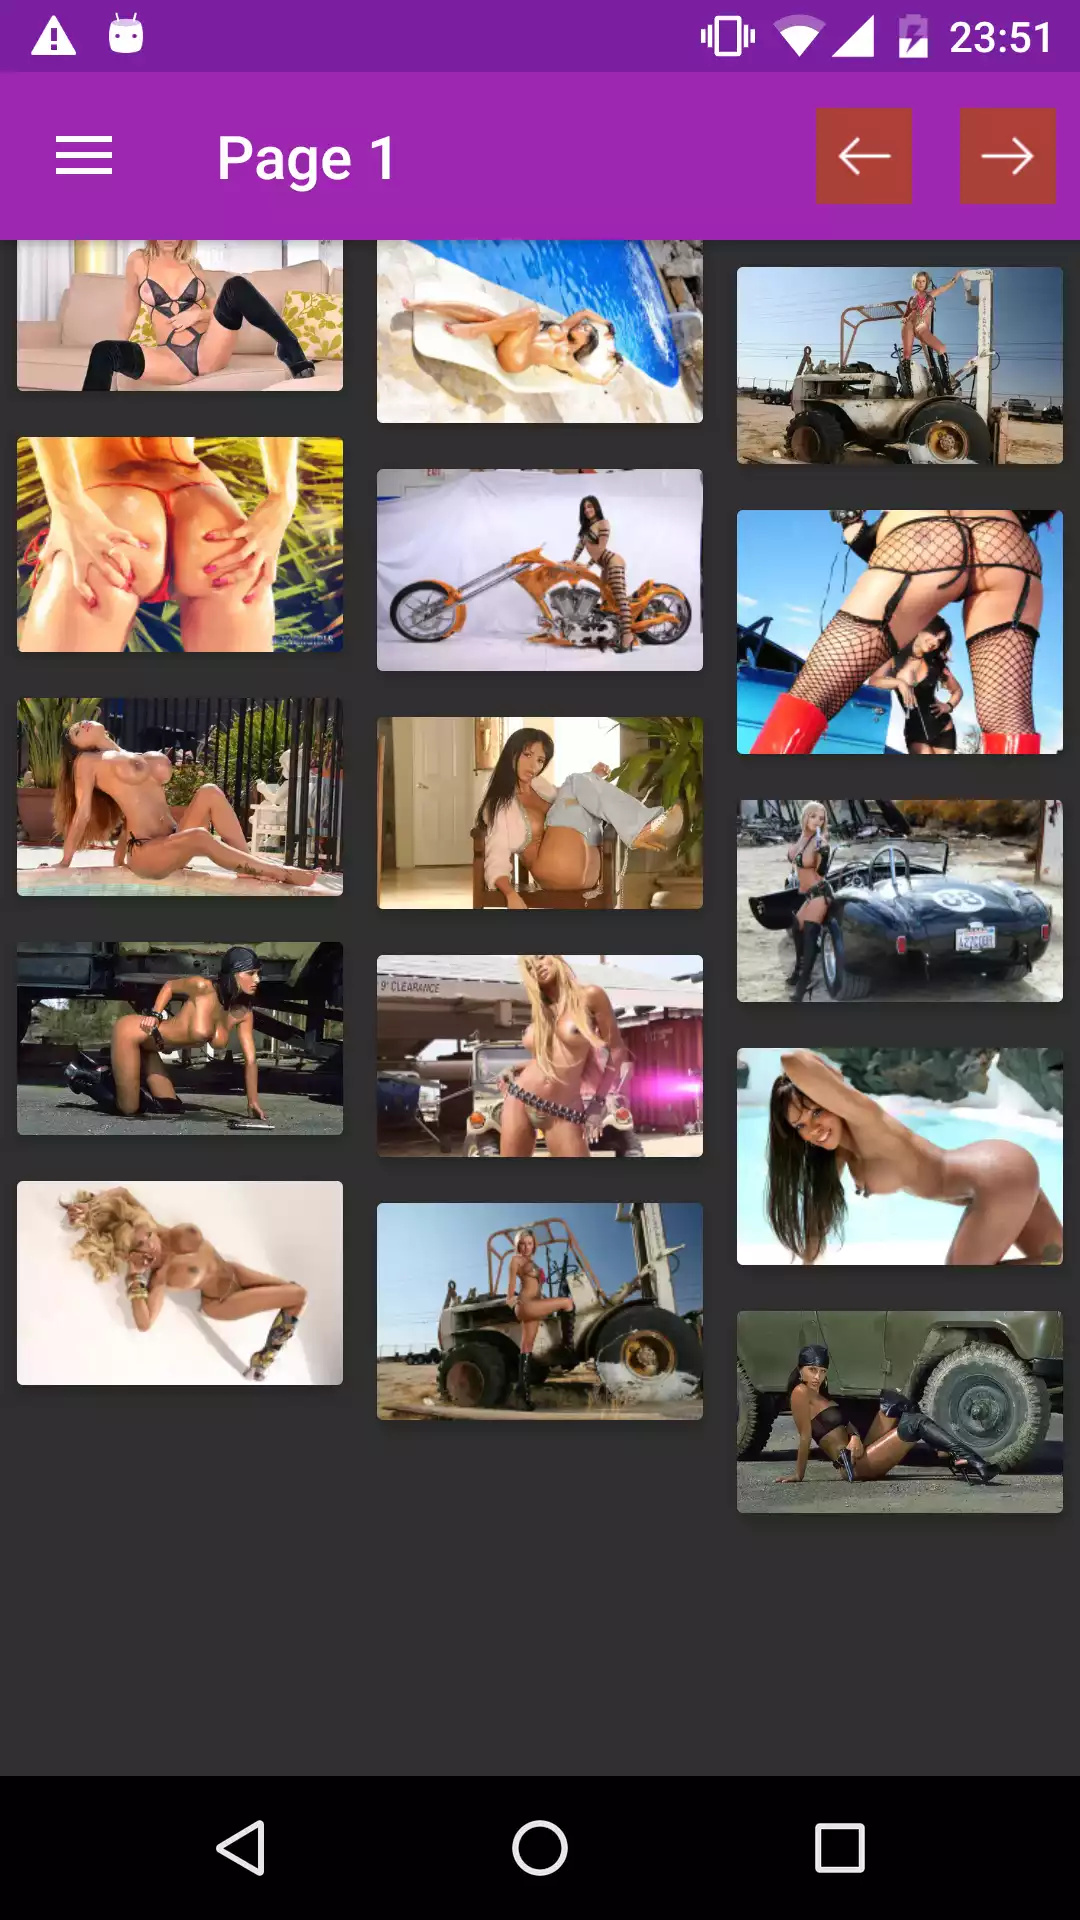 Action Wallpapers sexy,time,porn,download,pic,gallery,backgrounds,picture,photo,apk,pictures,pornstar,hentai,application,wallpapers,updates,punishment,futanari,galleries,erotic,offline,apps,pics,app,hantai